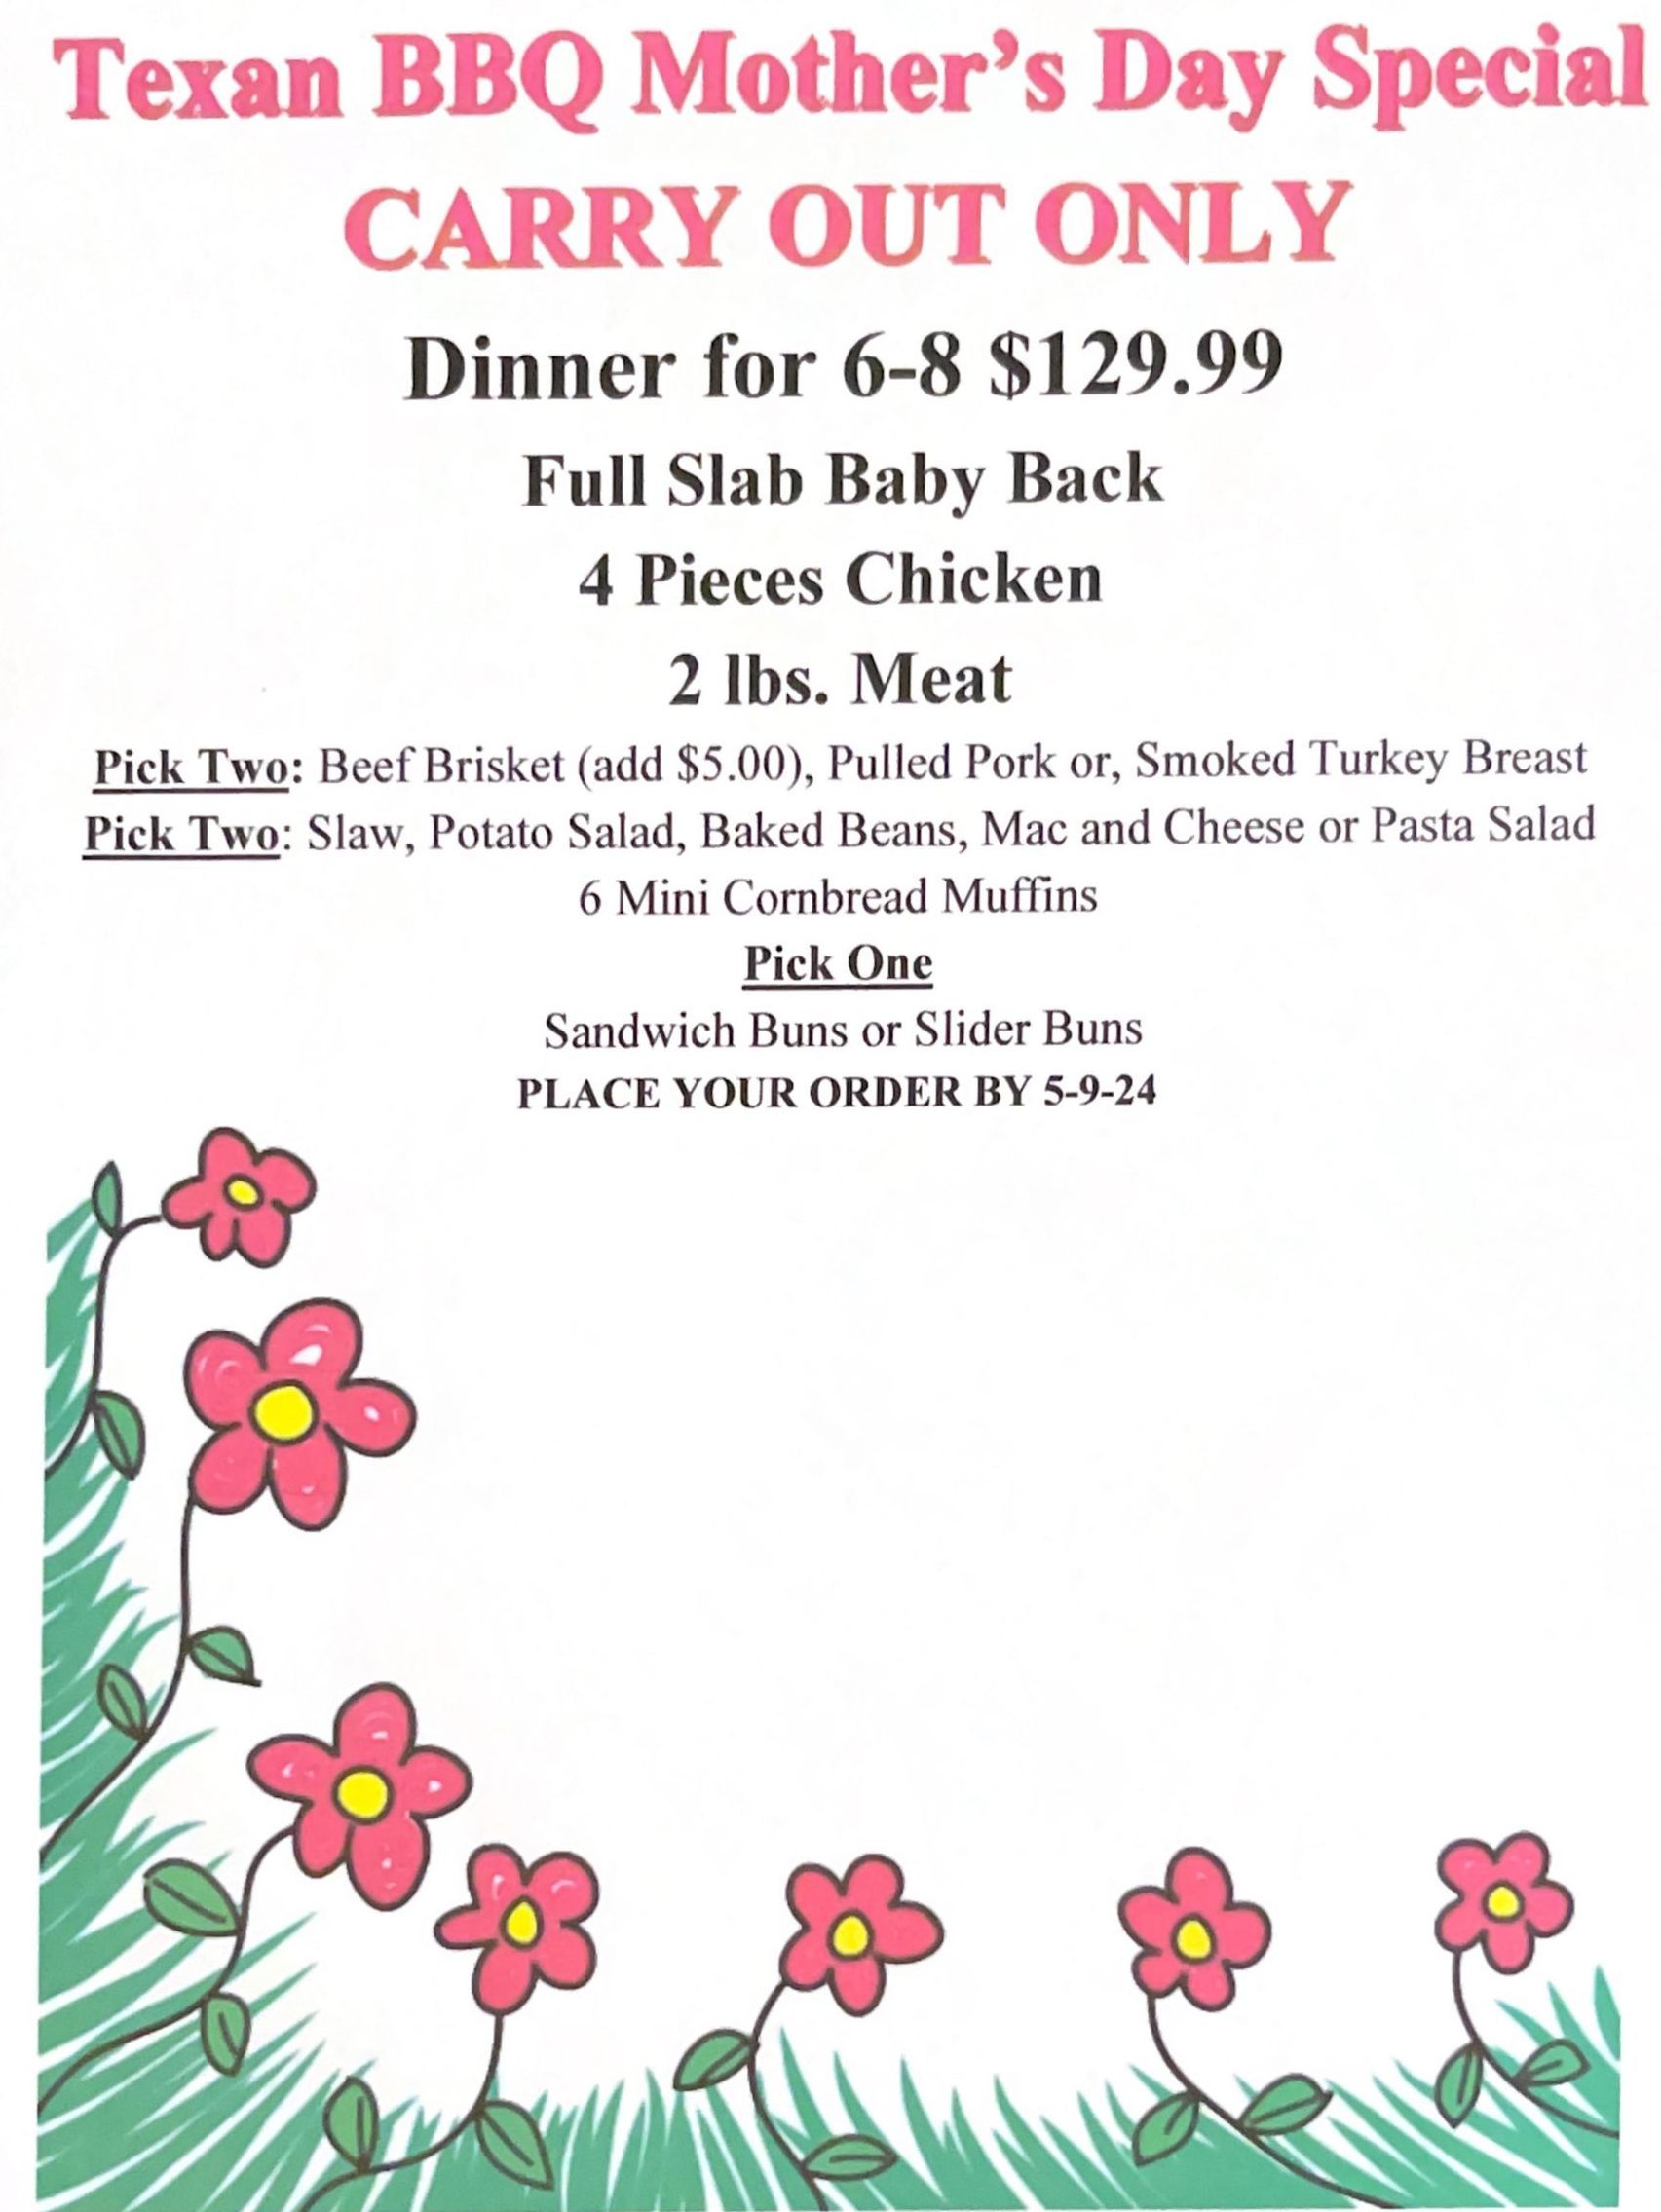 A flyer for texan bbq mother 's day special carry out only